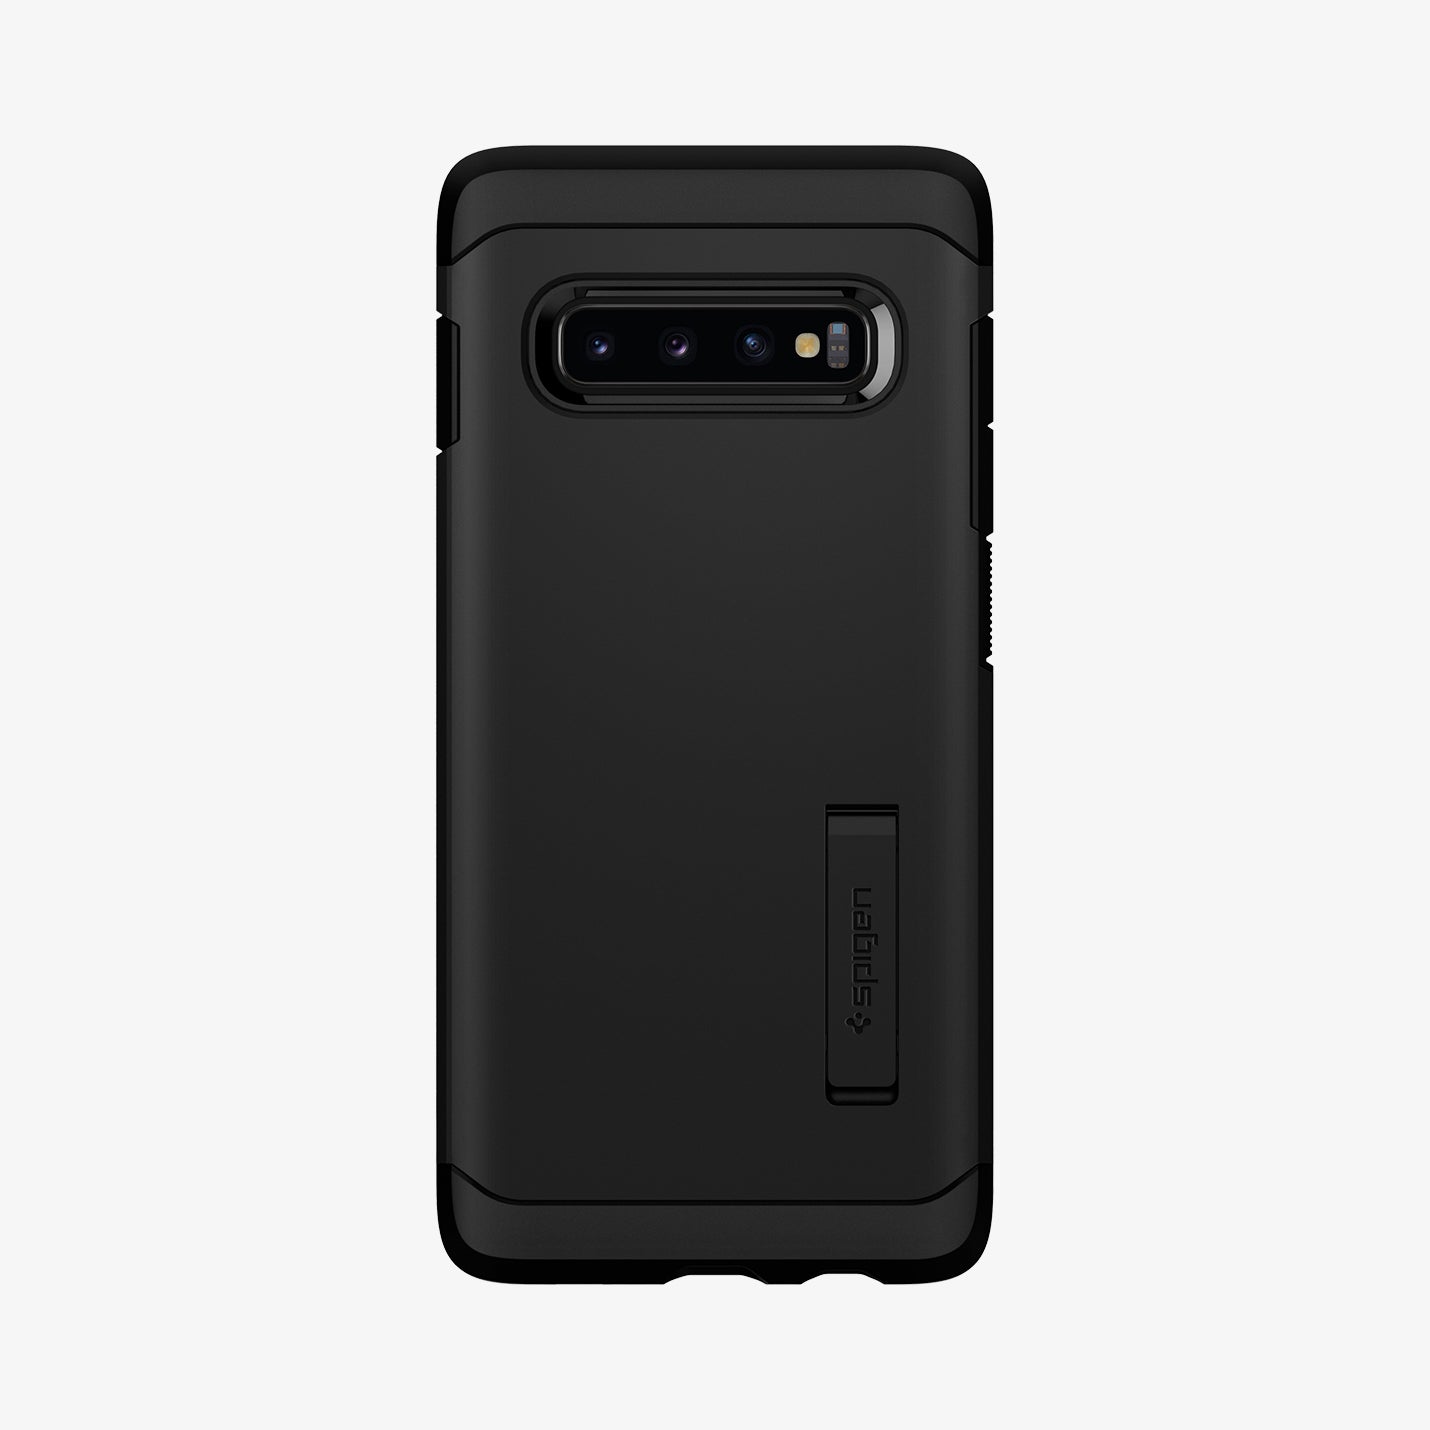 606CS25770 - Galaxy S10 Plus Tough Armor Case in black showing the back